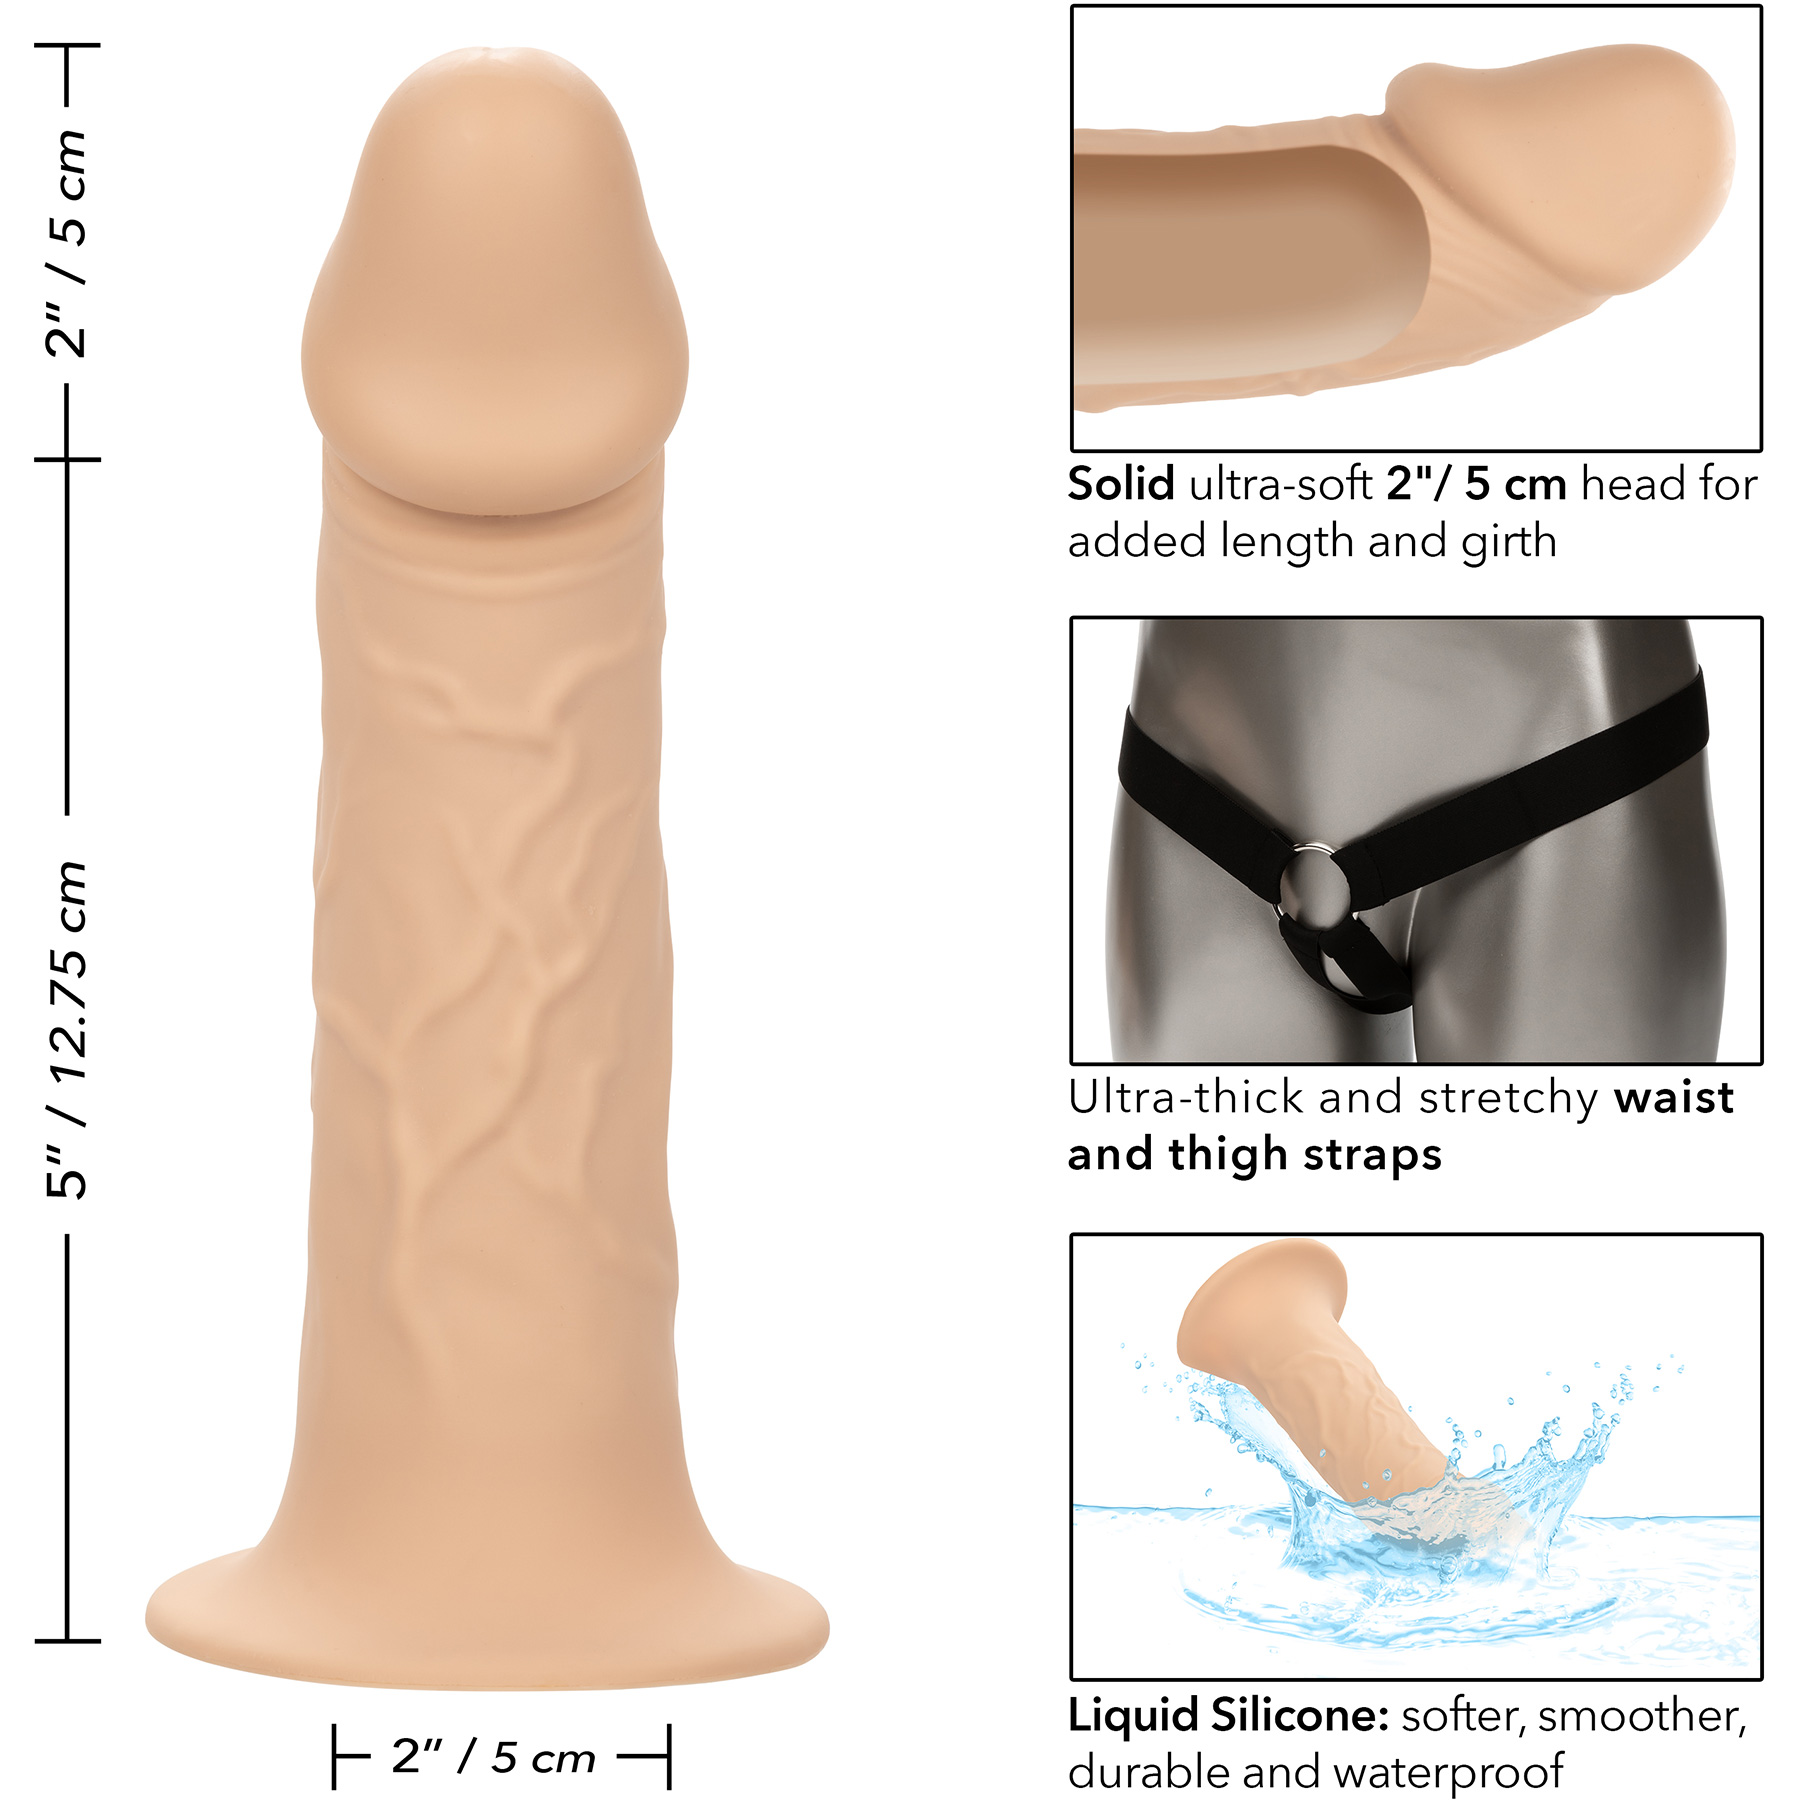 Performance Maxx Life-Like Silicone Penis Extension With Harness By CalExotics - Measurements